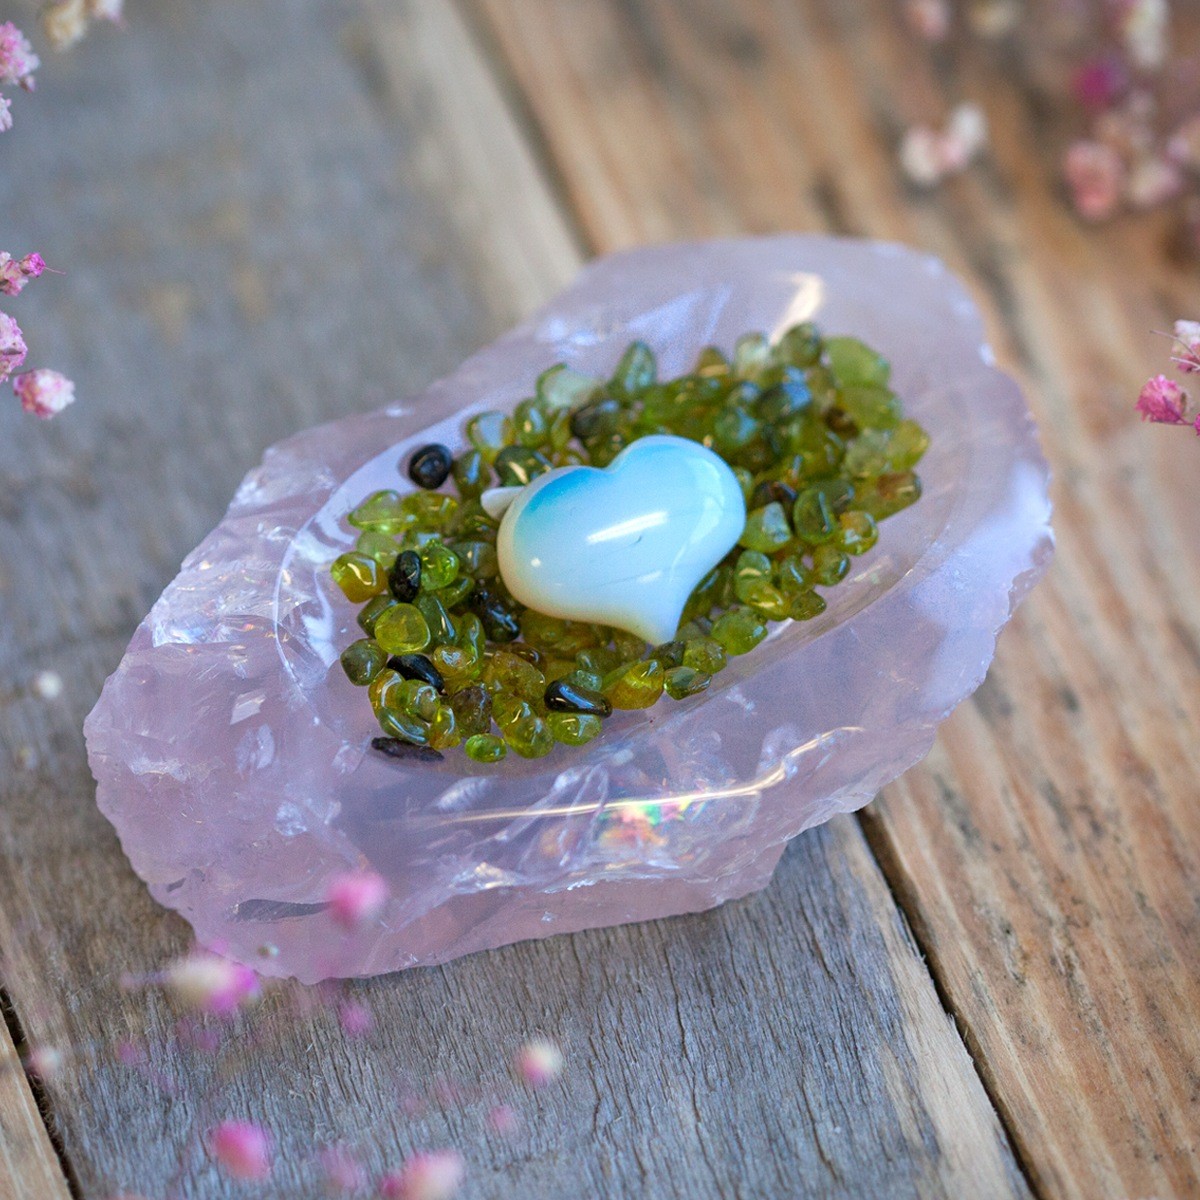 Rose Quartz Offering Bowls for Allowing and Receiving Love 6_15 Primary